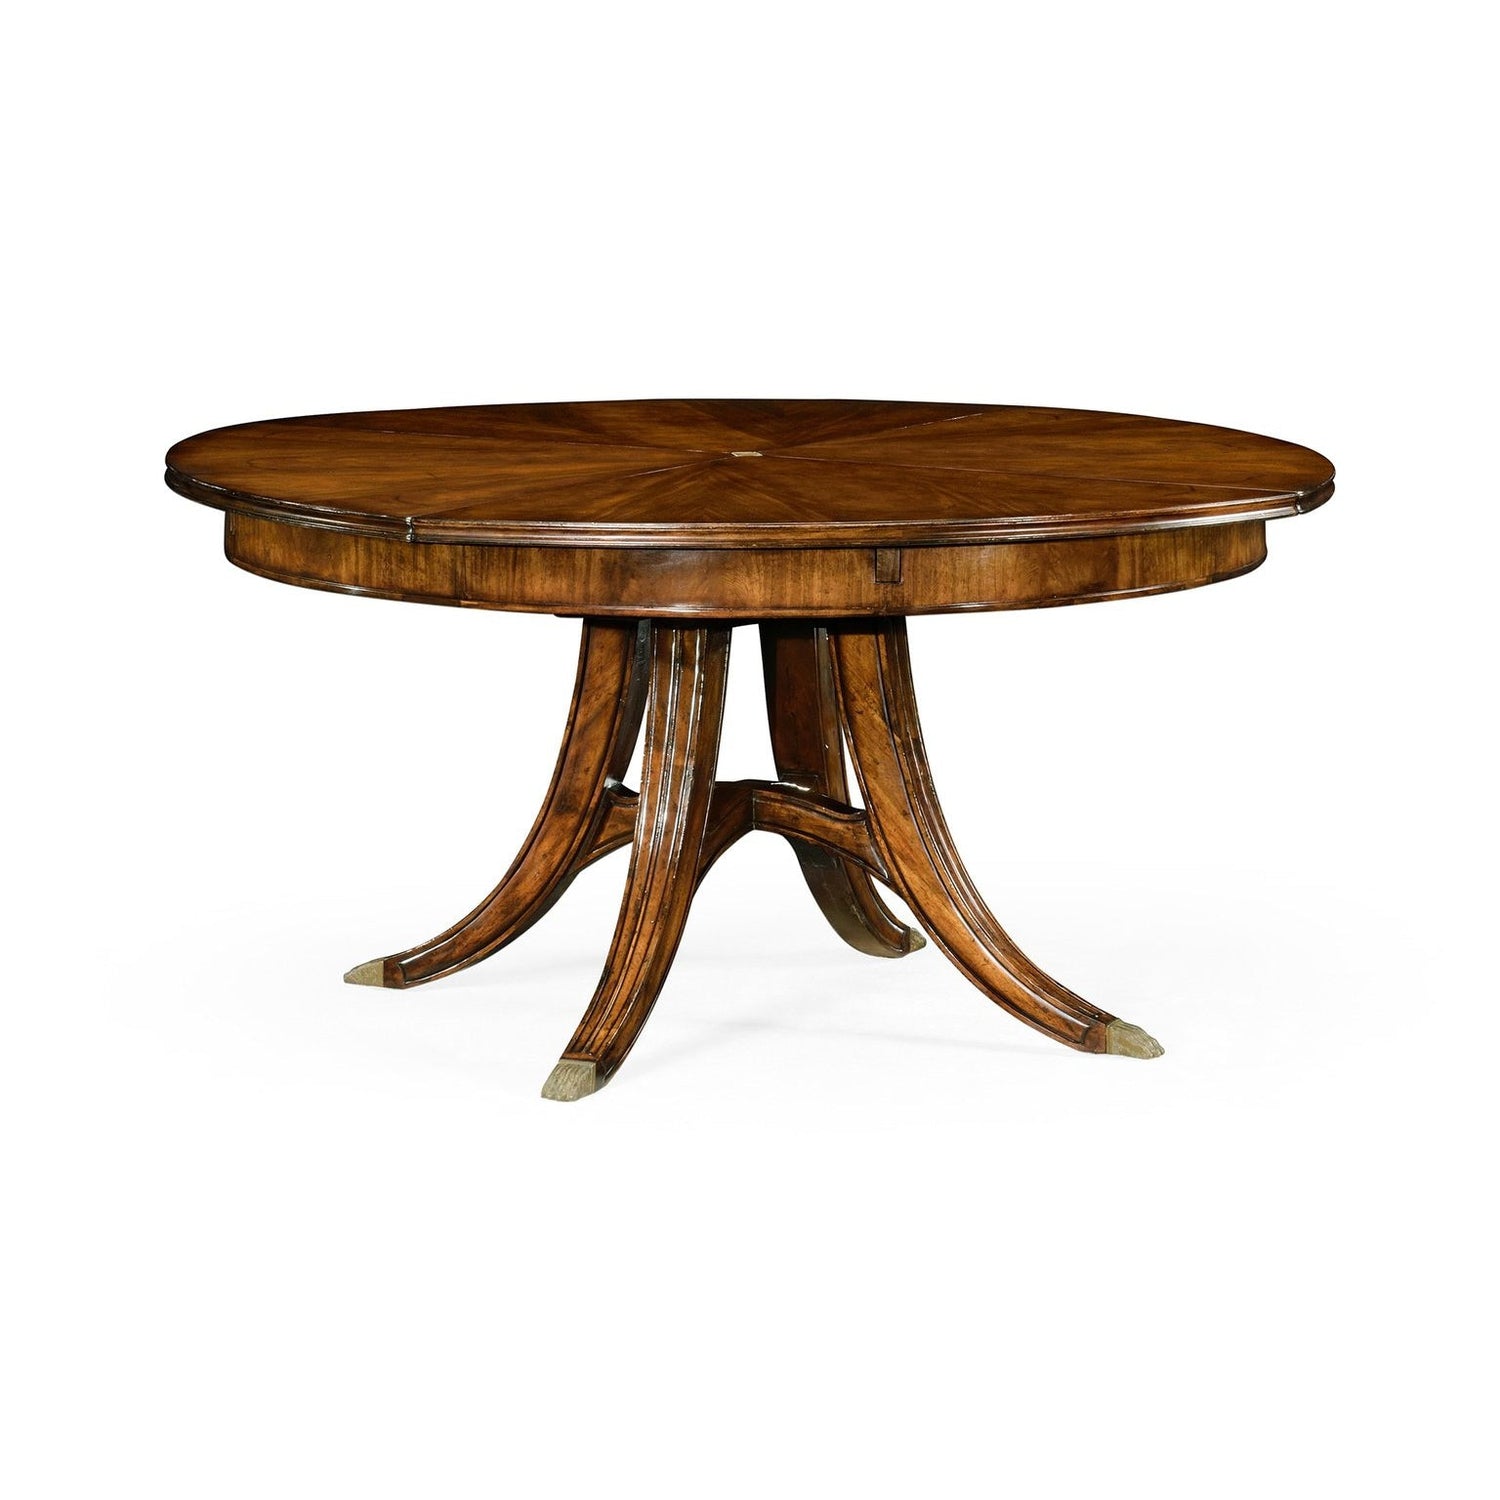 Jonathan Charles, 59" Circular Dining Table with Self–Storing Leaves